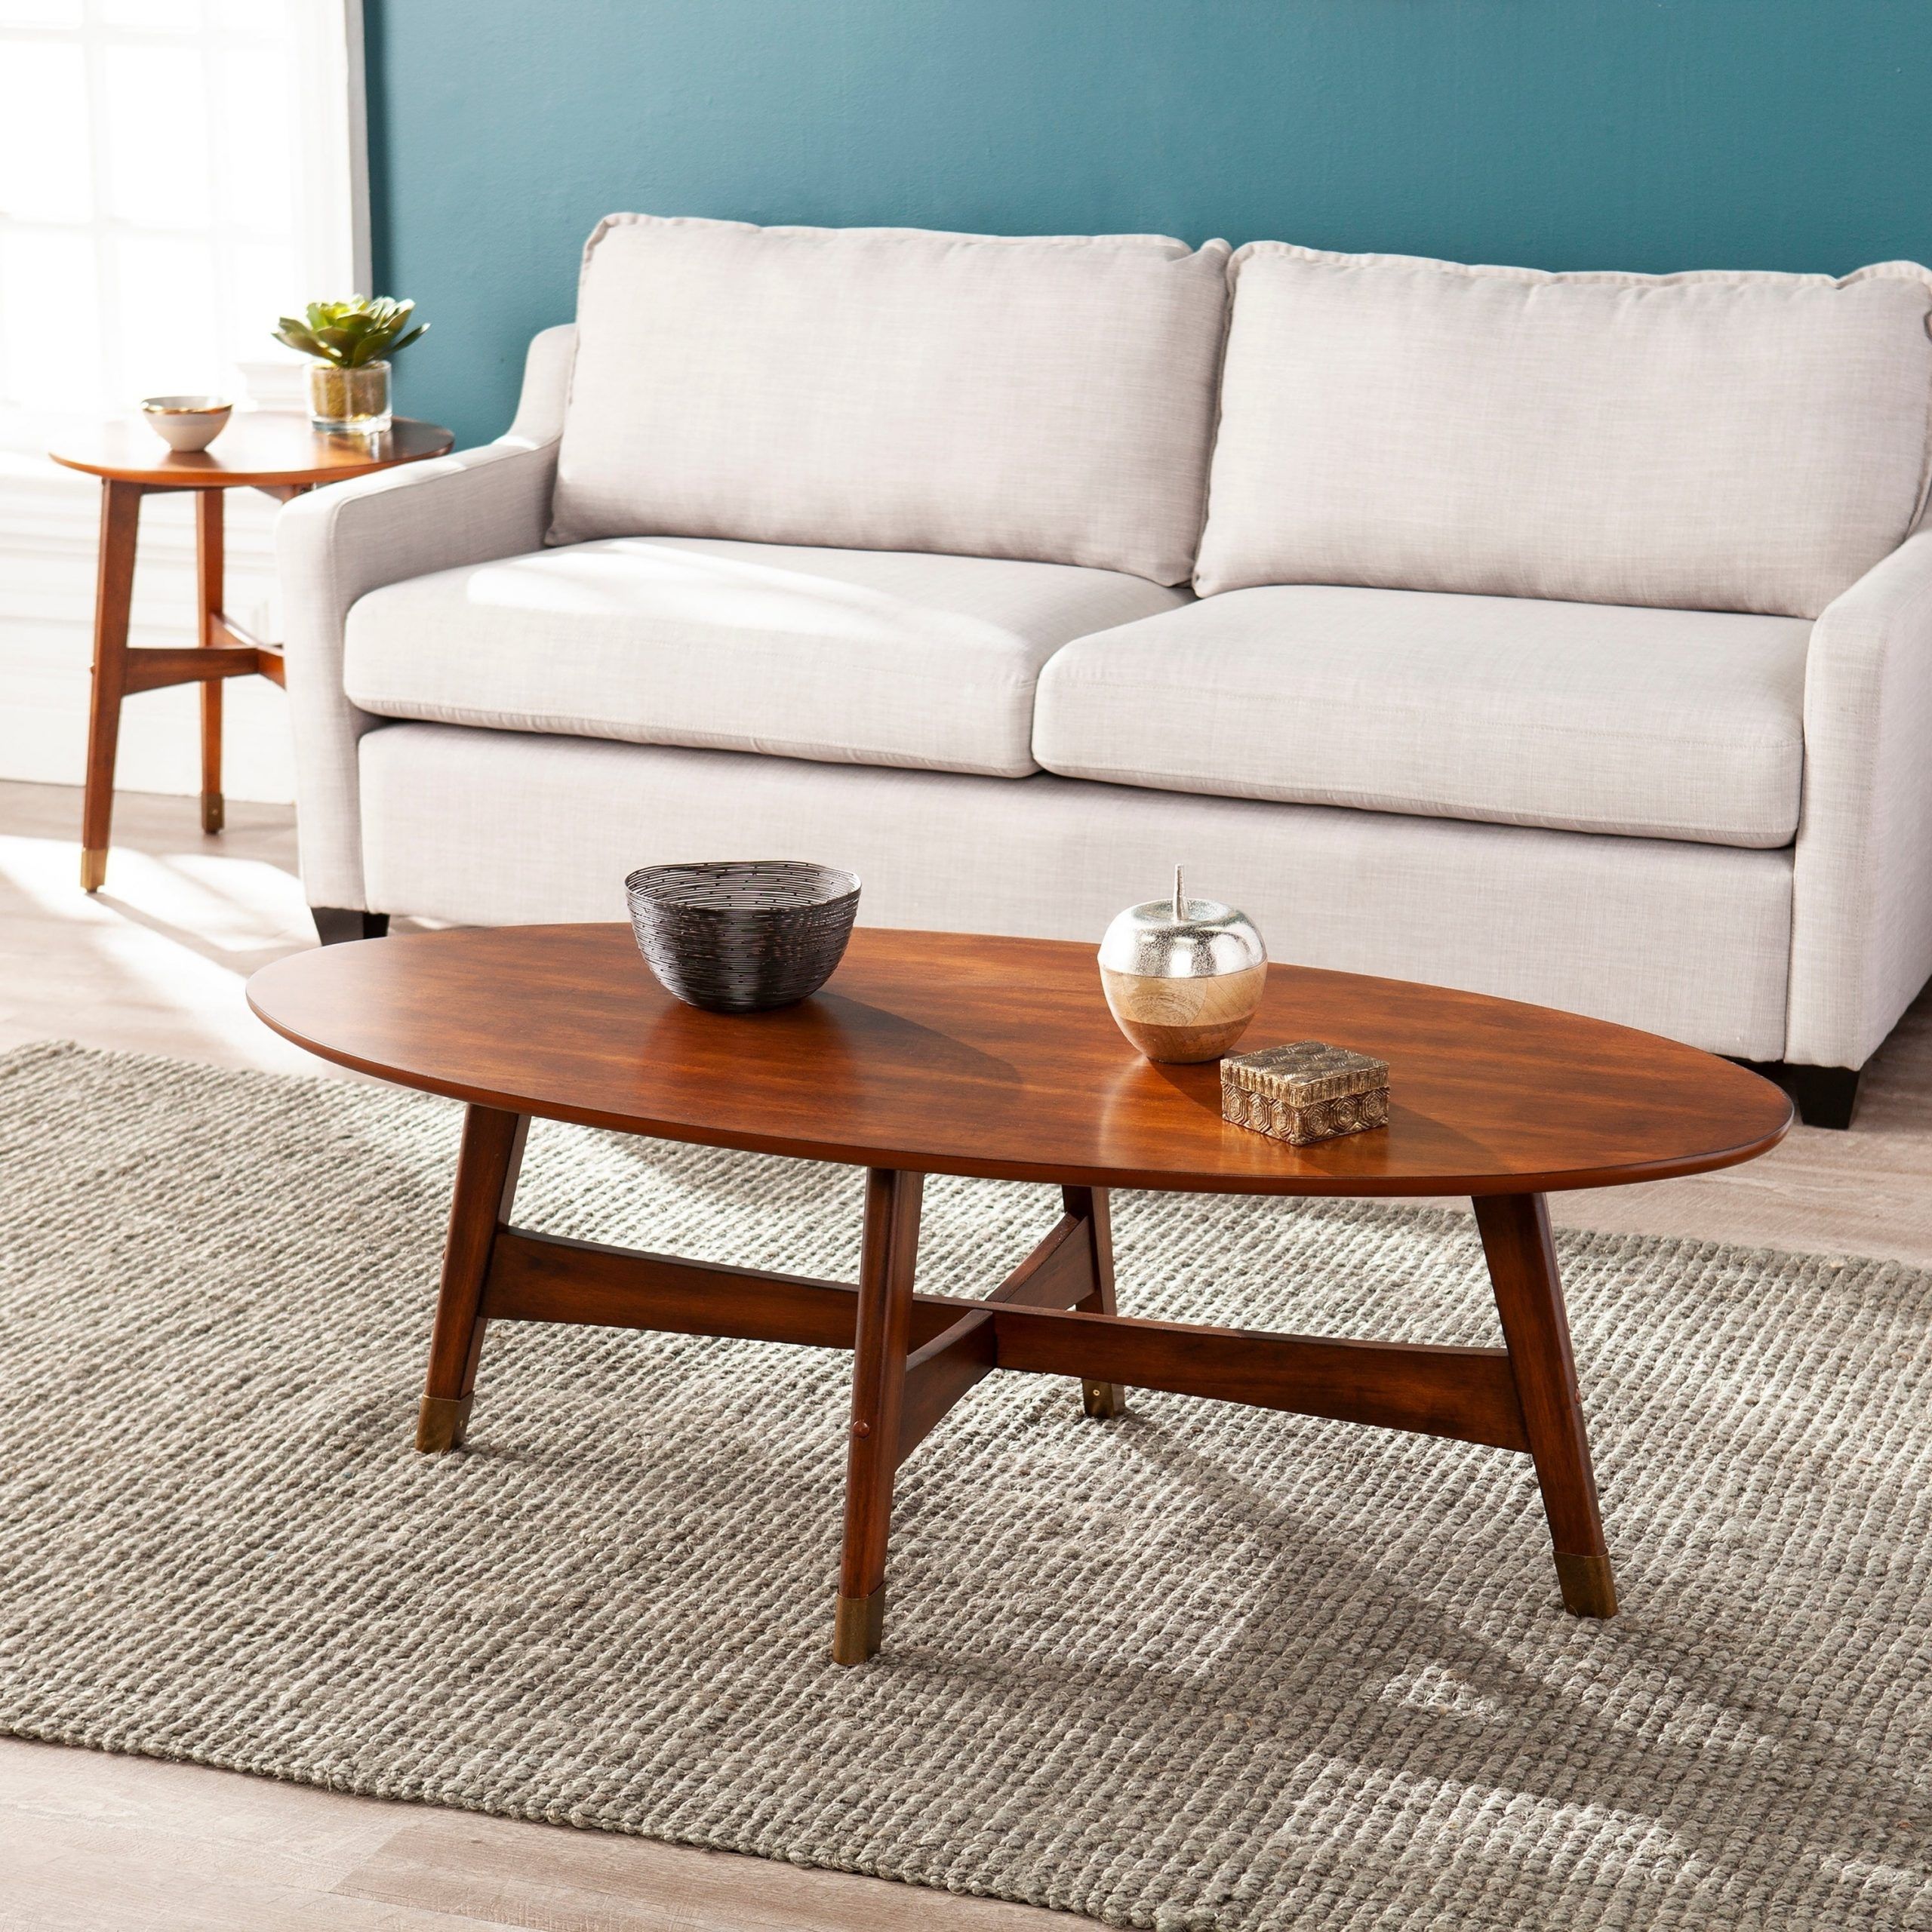 Sei Furniture Ale Oval Mid Century Modern Coffee Table – On Sale –  Overstock – 22700516 Inside Mid Century Coffee Tables (View 11 of 20)